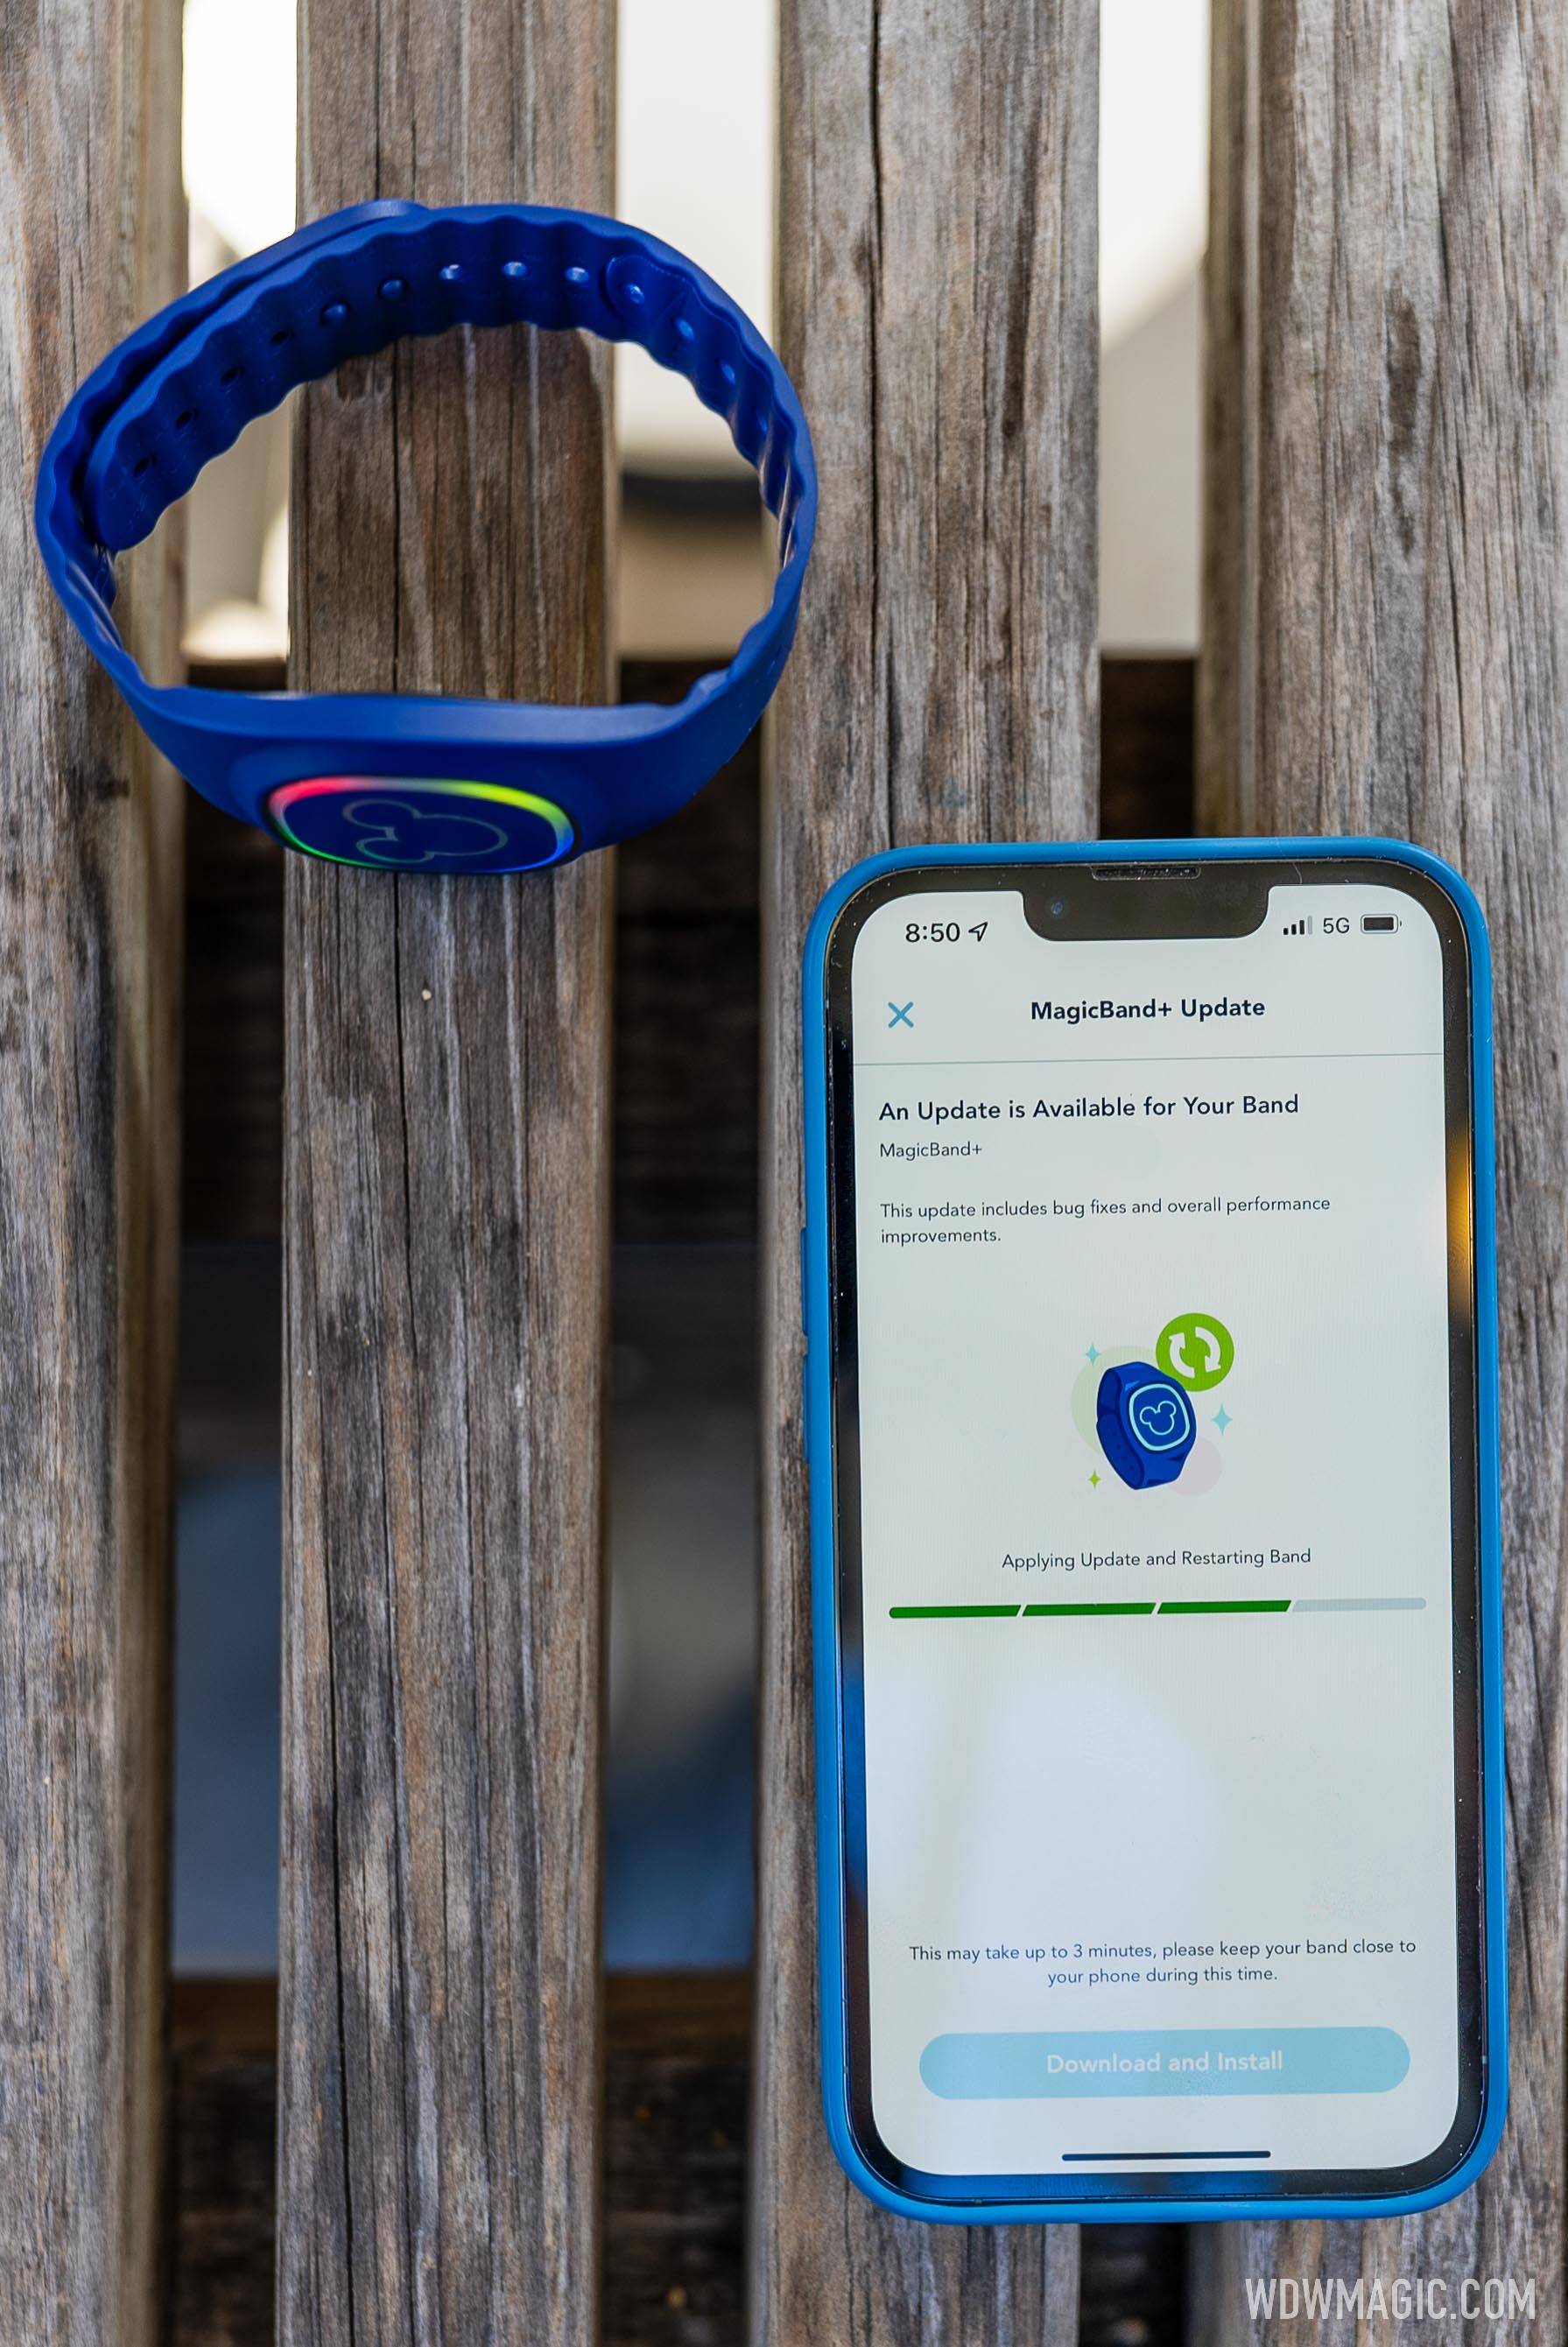 Hands on with MagicBand+